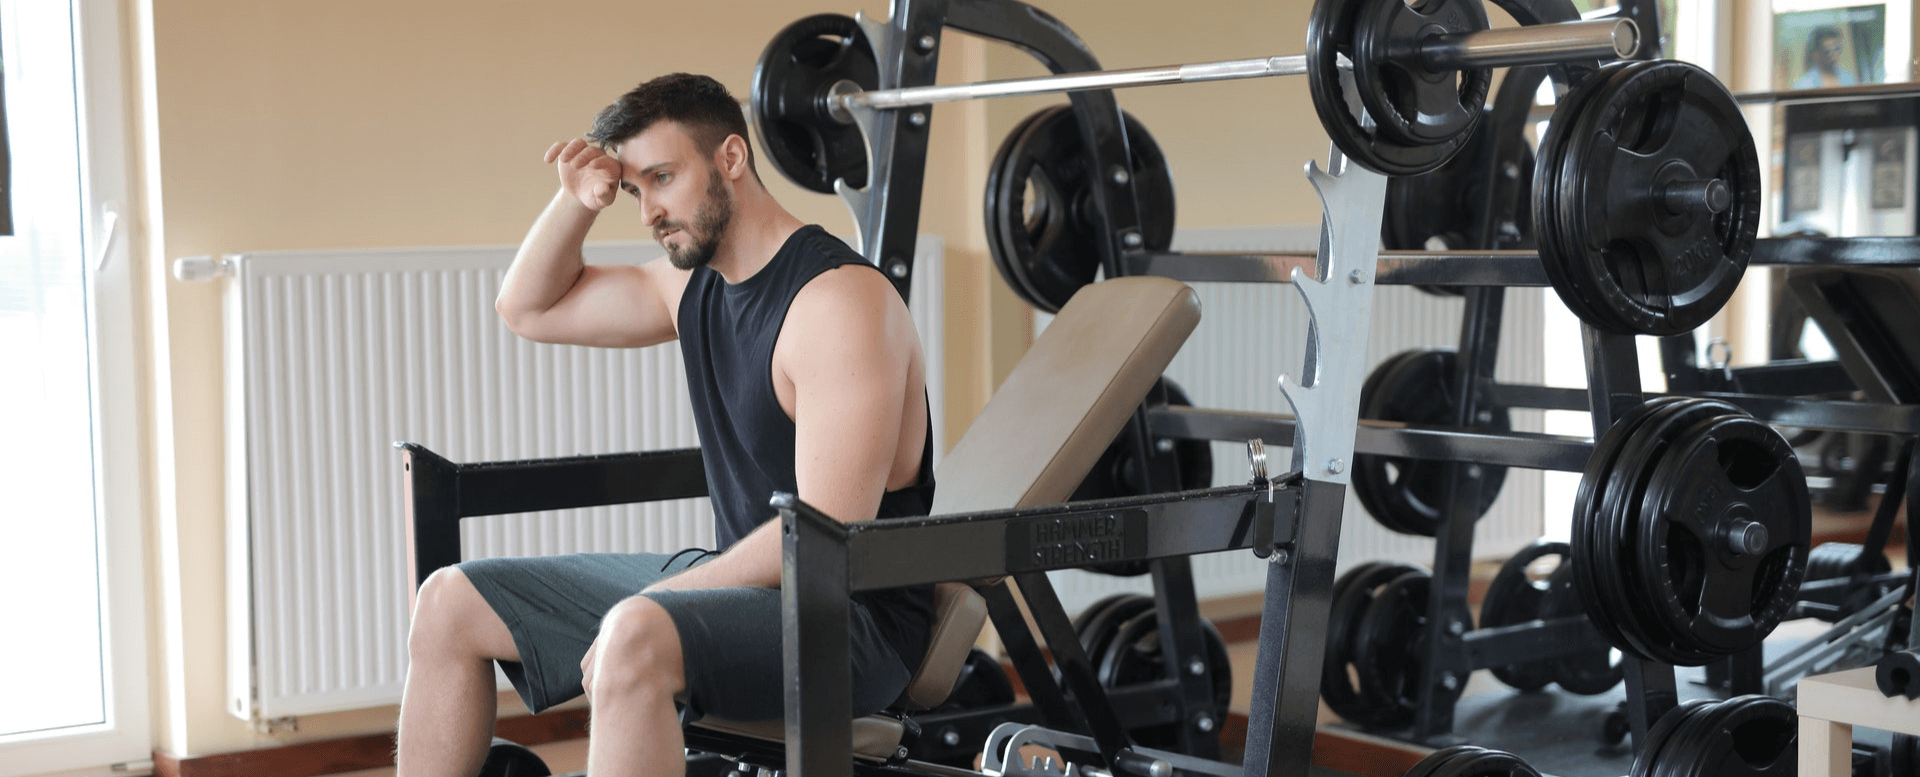 Progressive Overload - Why You’re Not Seeing Improvements 